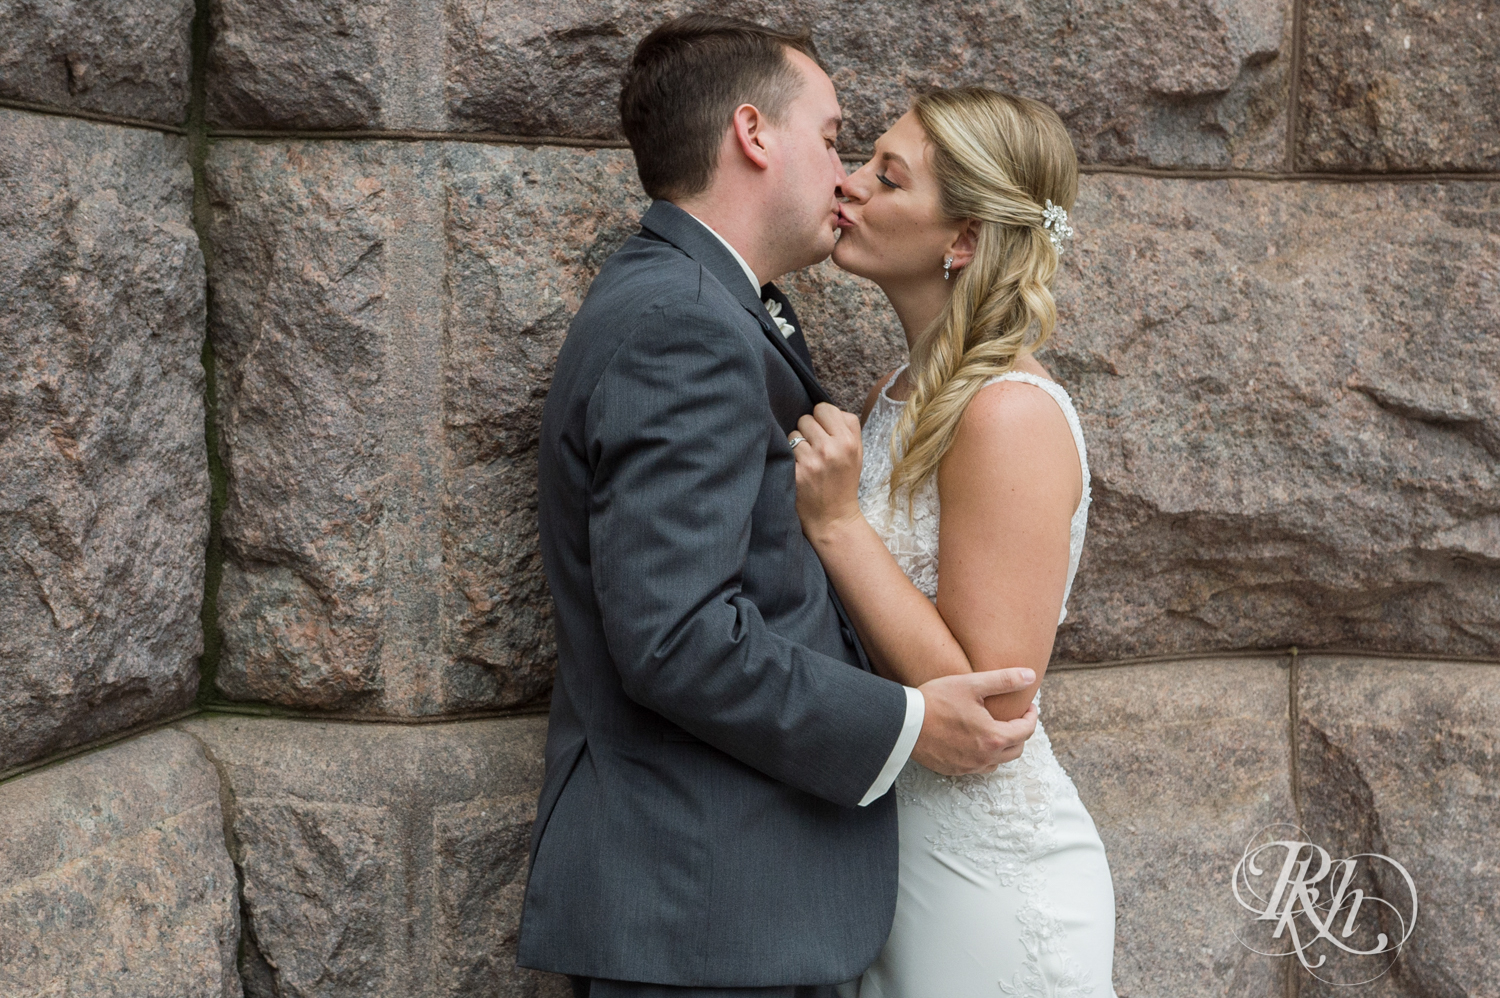 Bride and groom kiss in front of building in the city in Minneapolis, Minnesota.